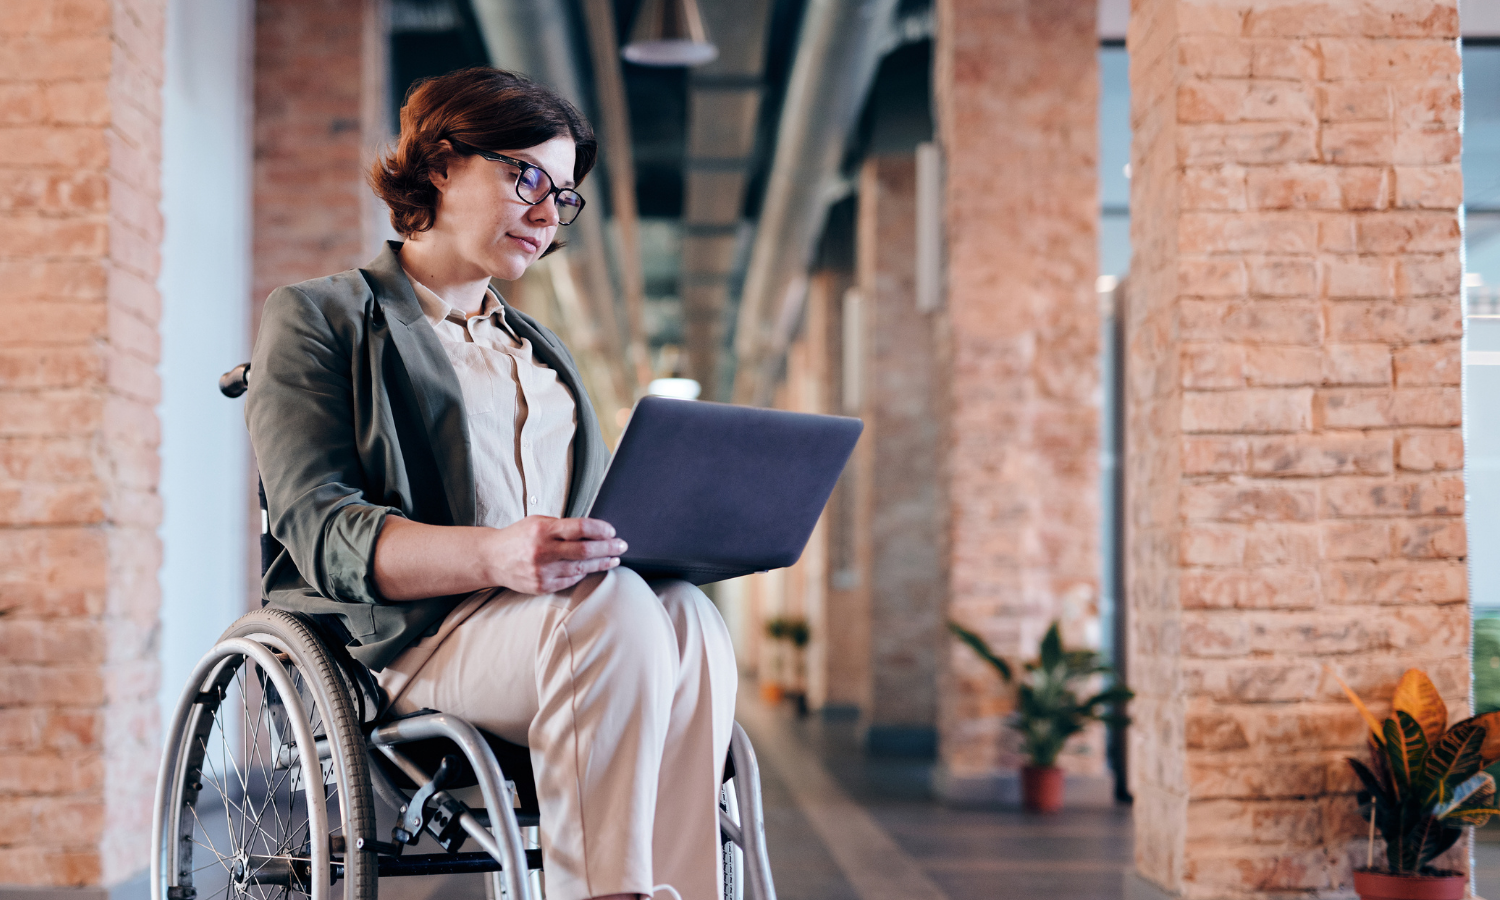 woman seated in wheelchair using a computer